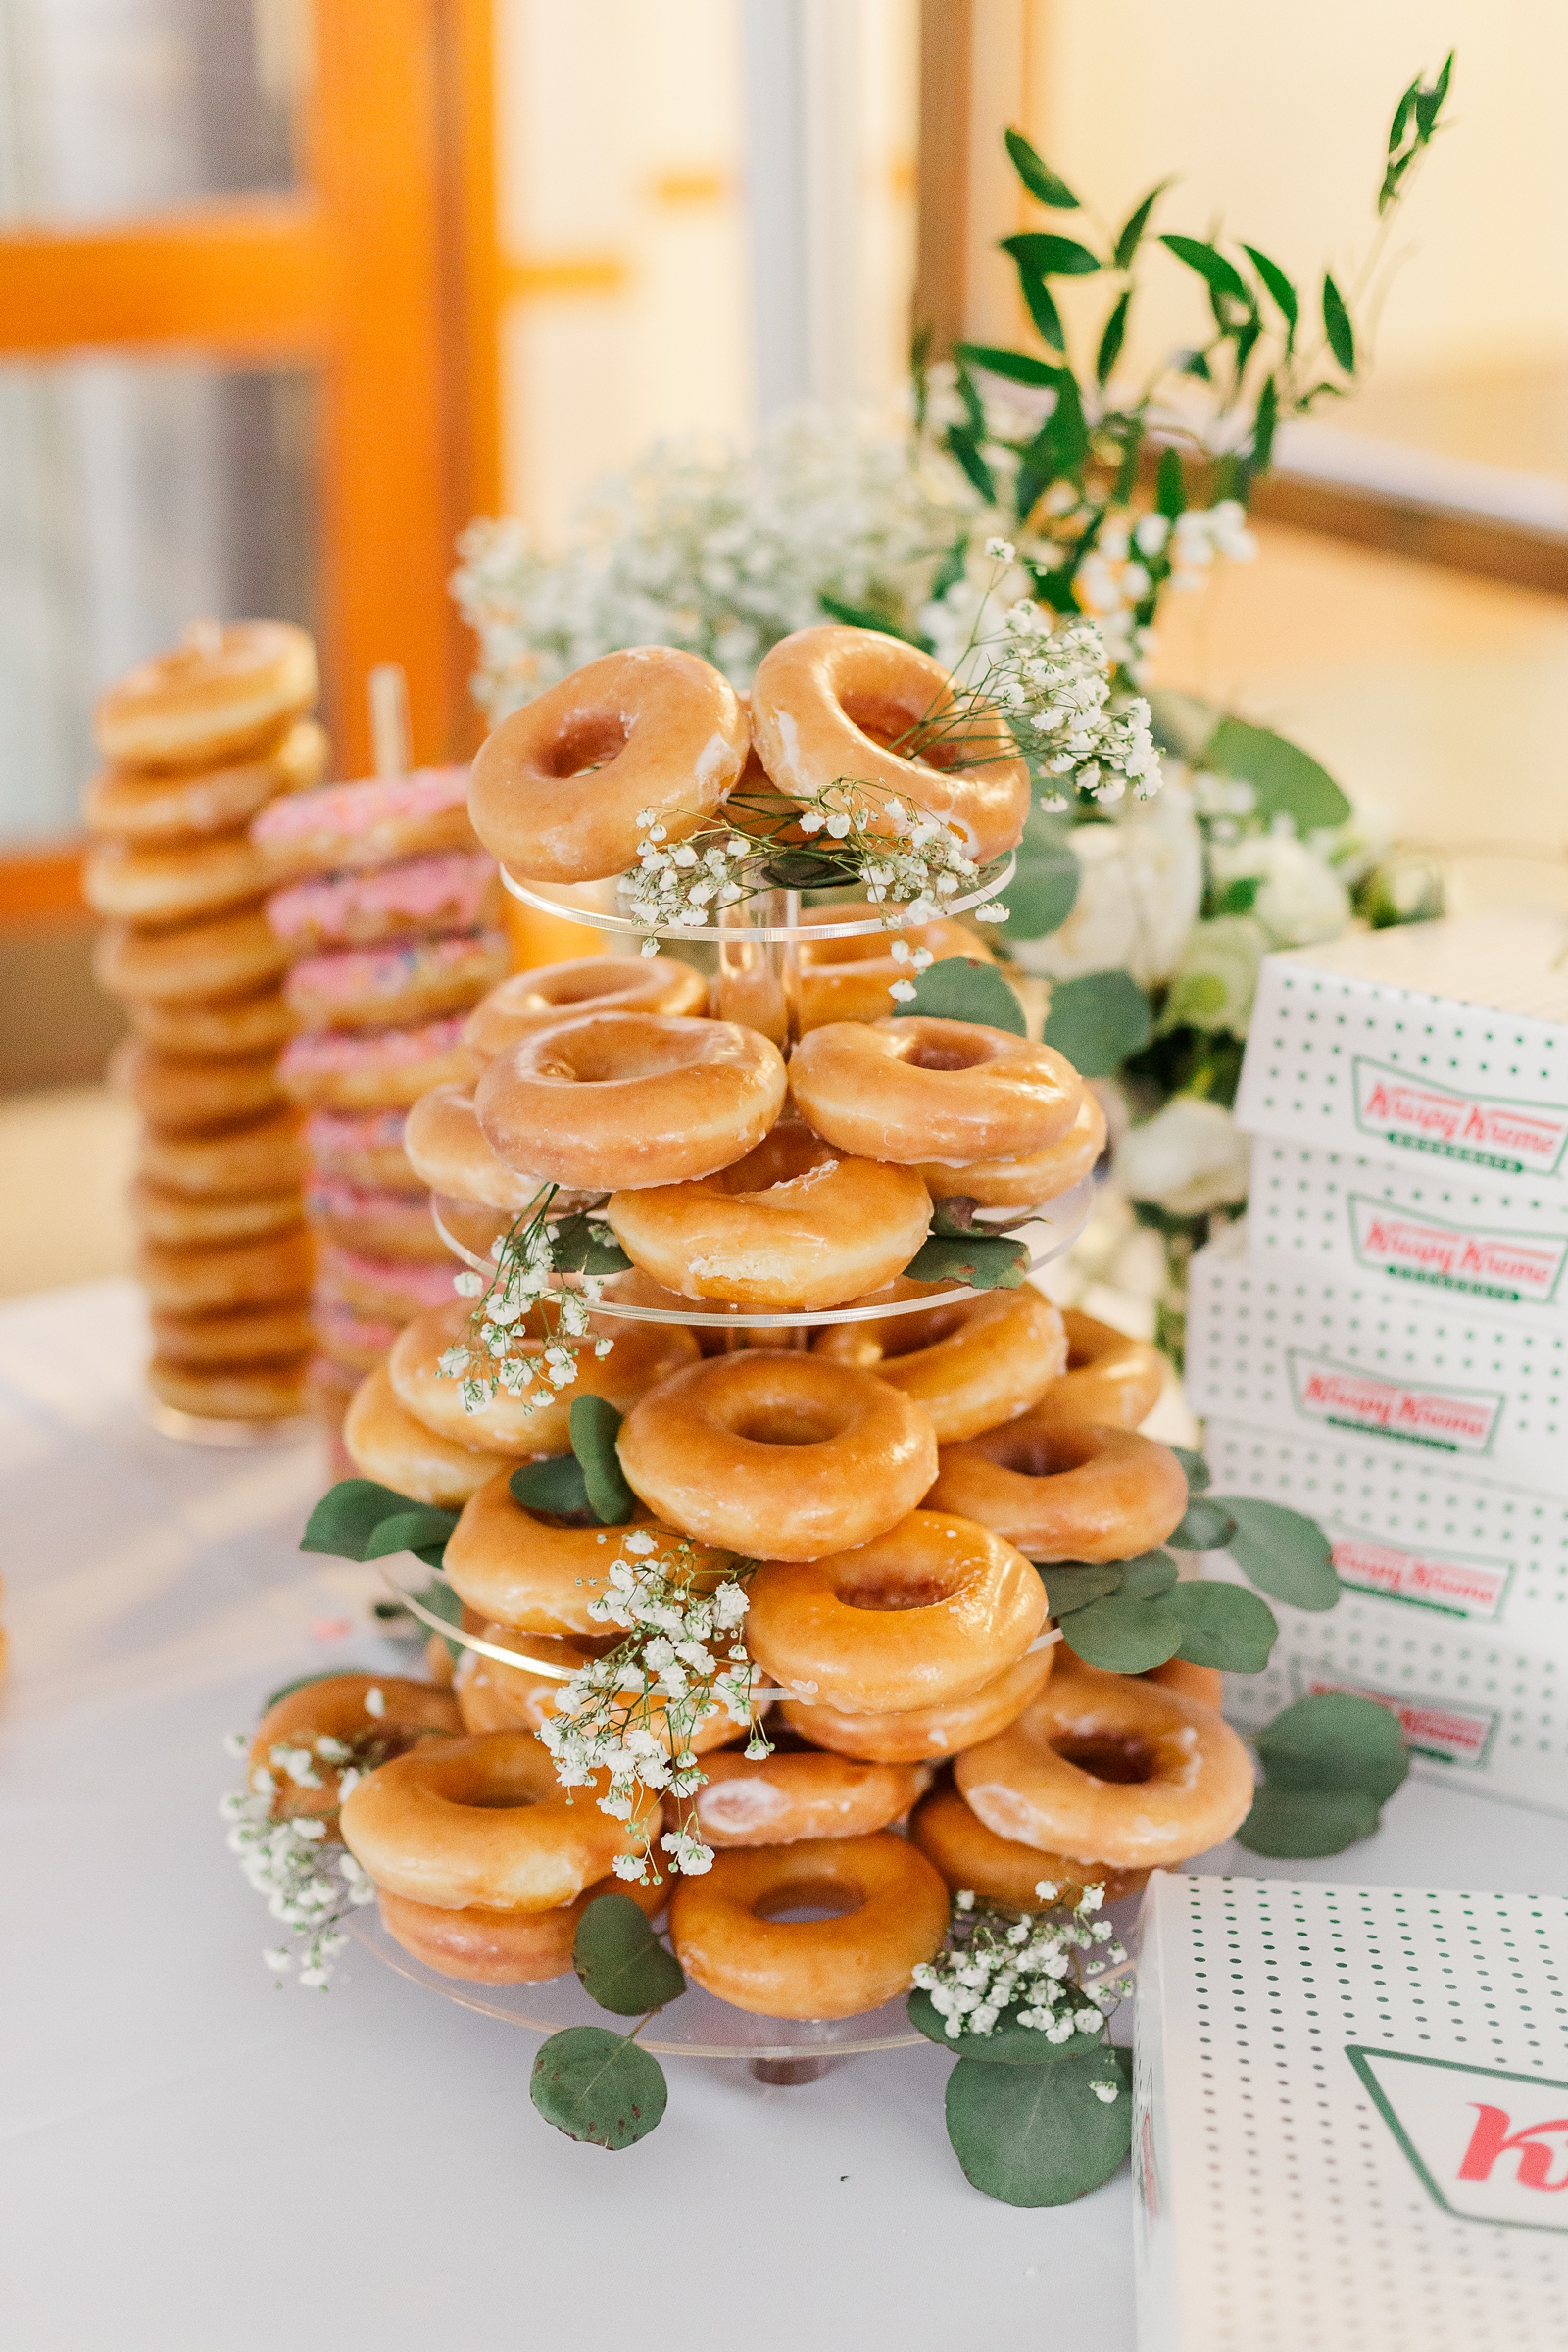 Donut Dessert Table at Maymont Wedding Reception. By Wedding Photographer Kailey Brianne Photography.